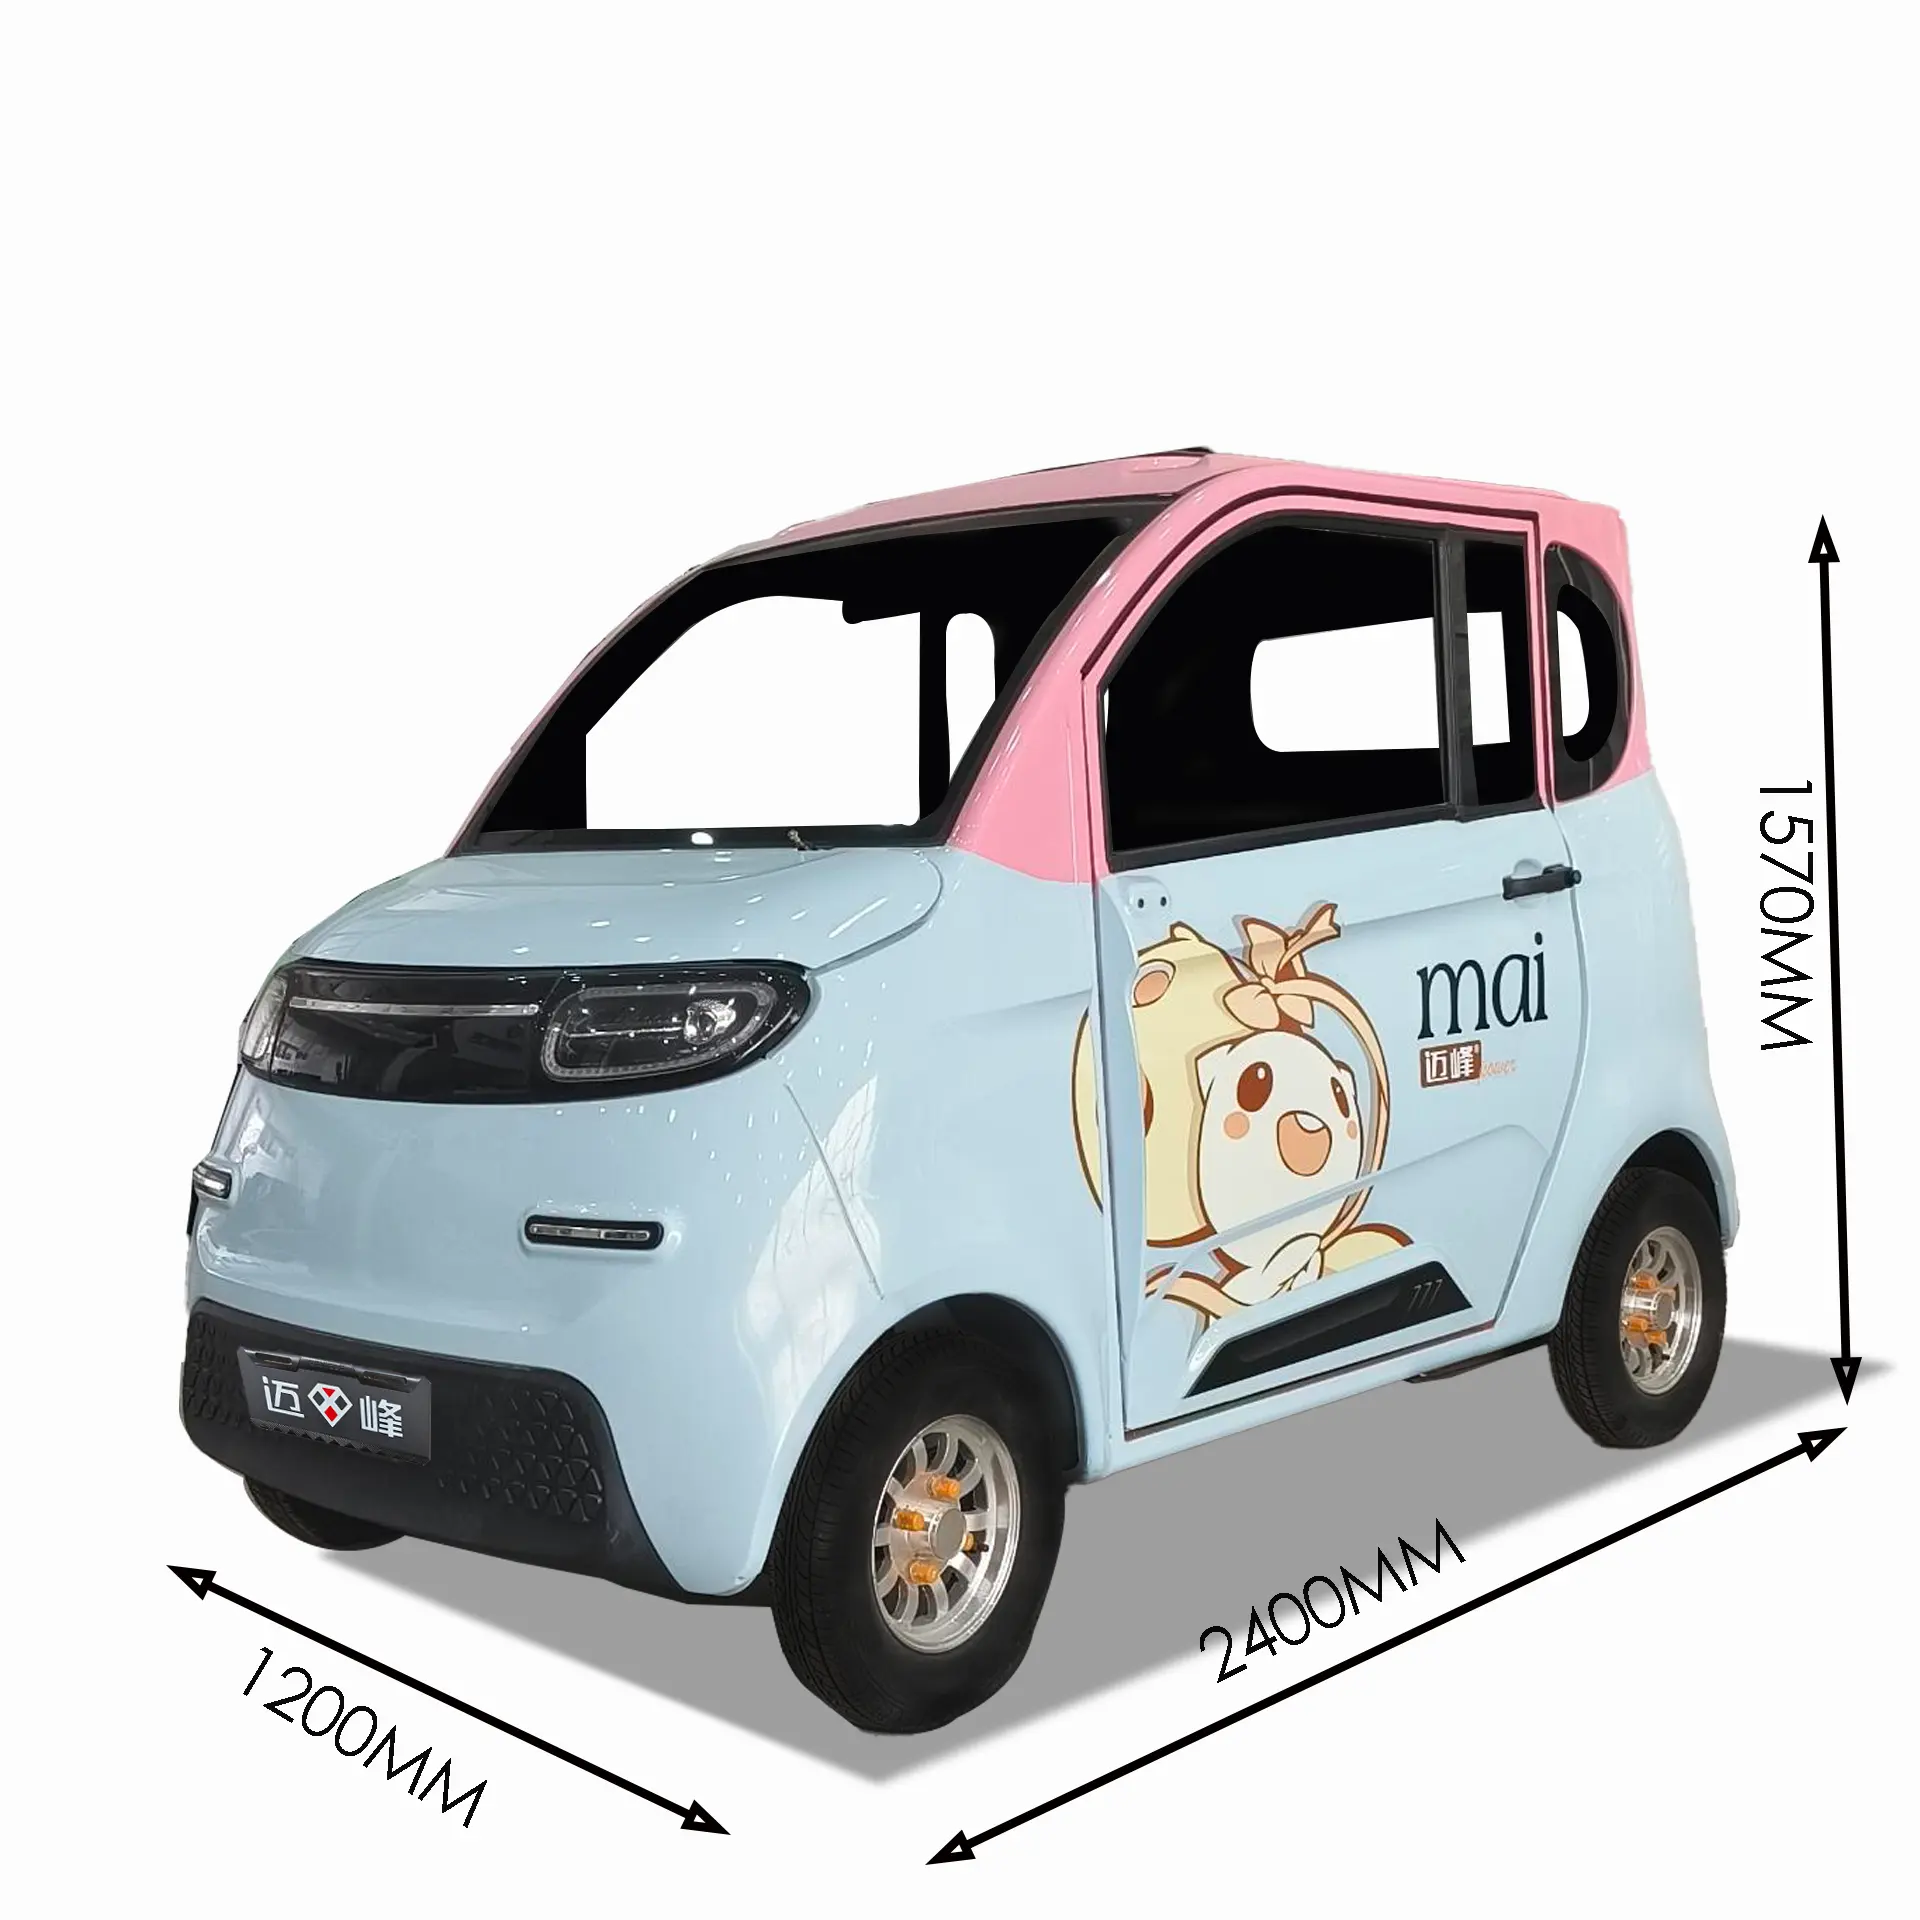 Maifeng Low-priced Mini Electric Car Smart Four-wheel Mini Car Made In China Best-selling High-quality Most Popular